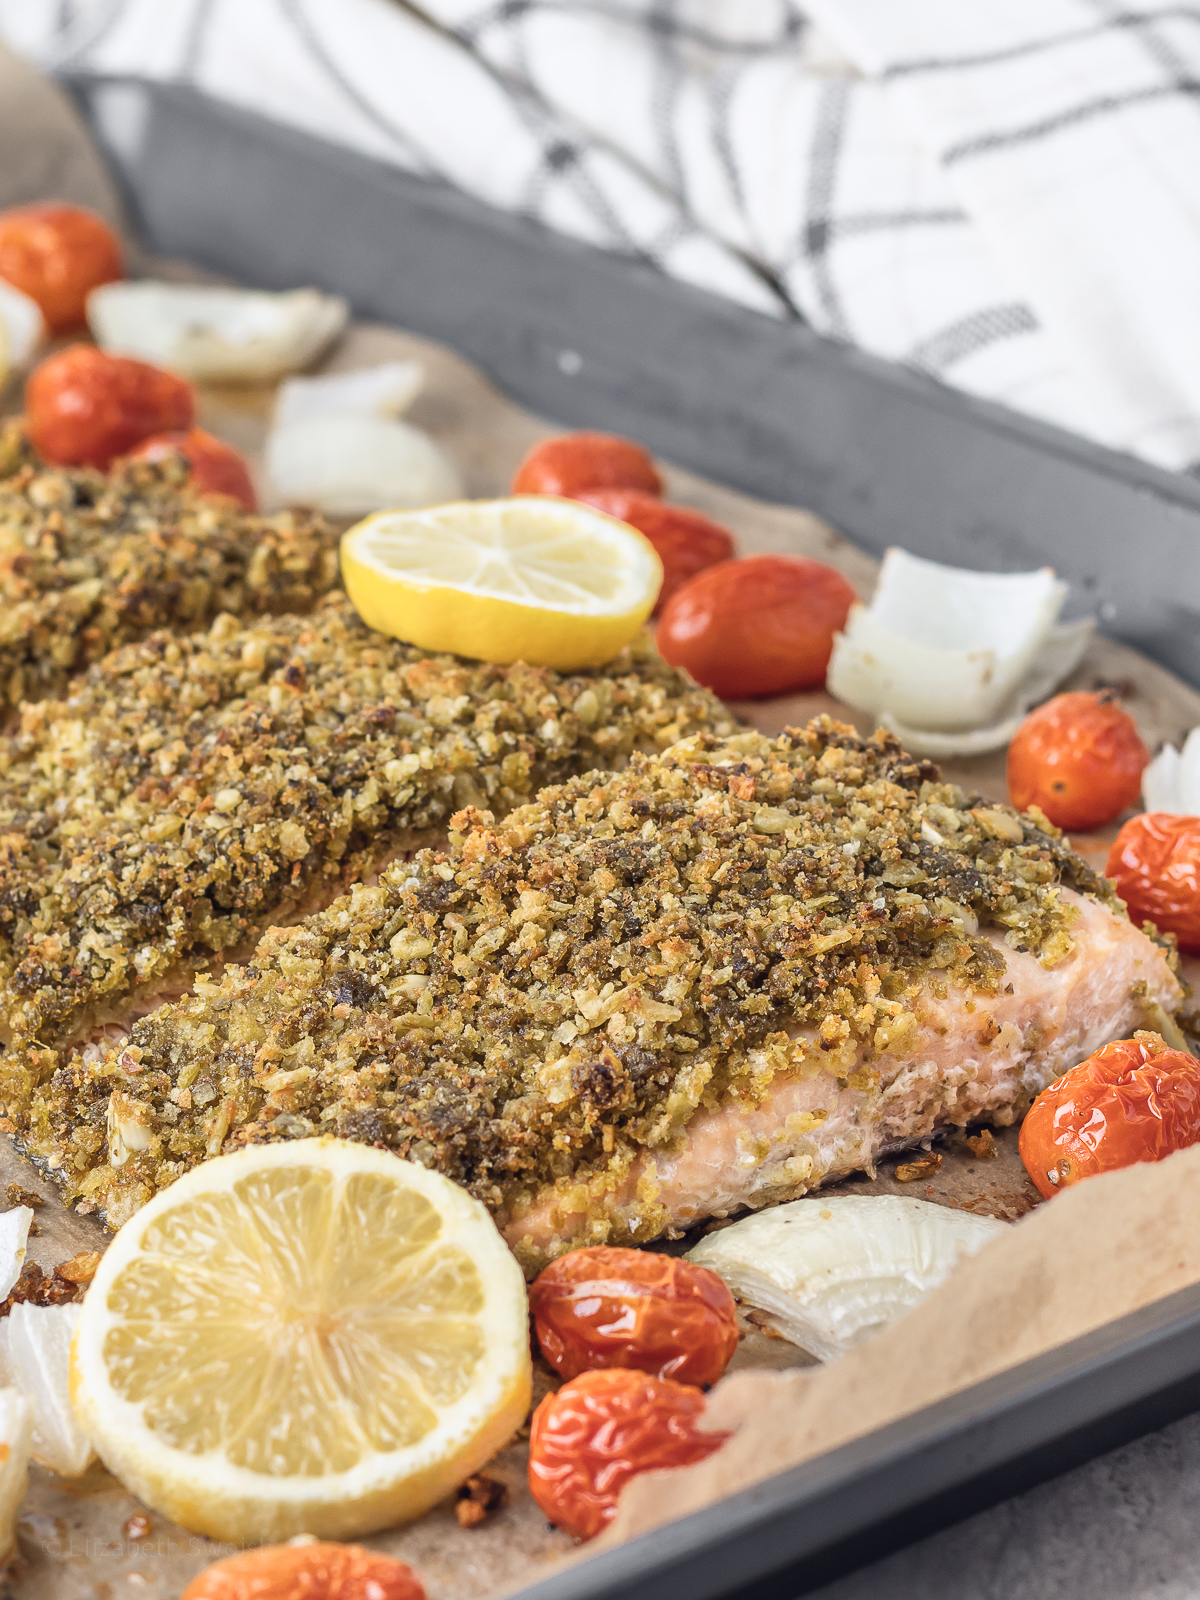 A fully baked pesto crusted salmon with roasted onions and tomatoes on the slide. Garnish of fresh lemon slices.